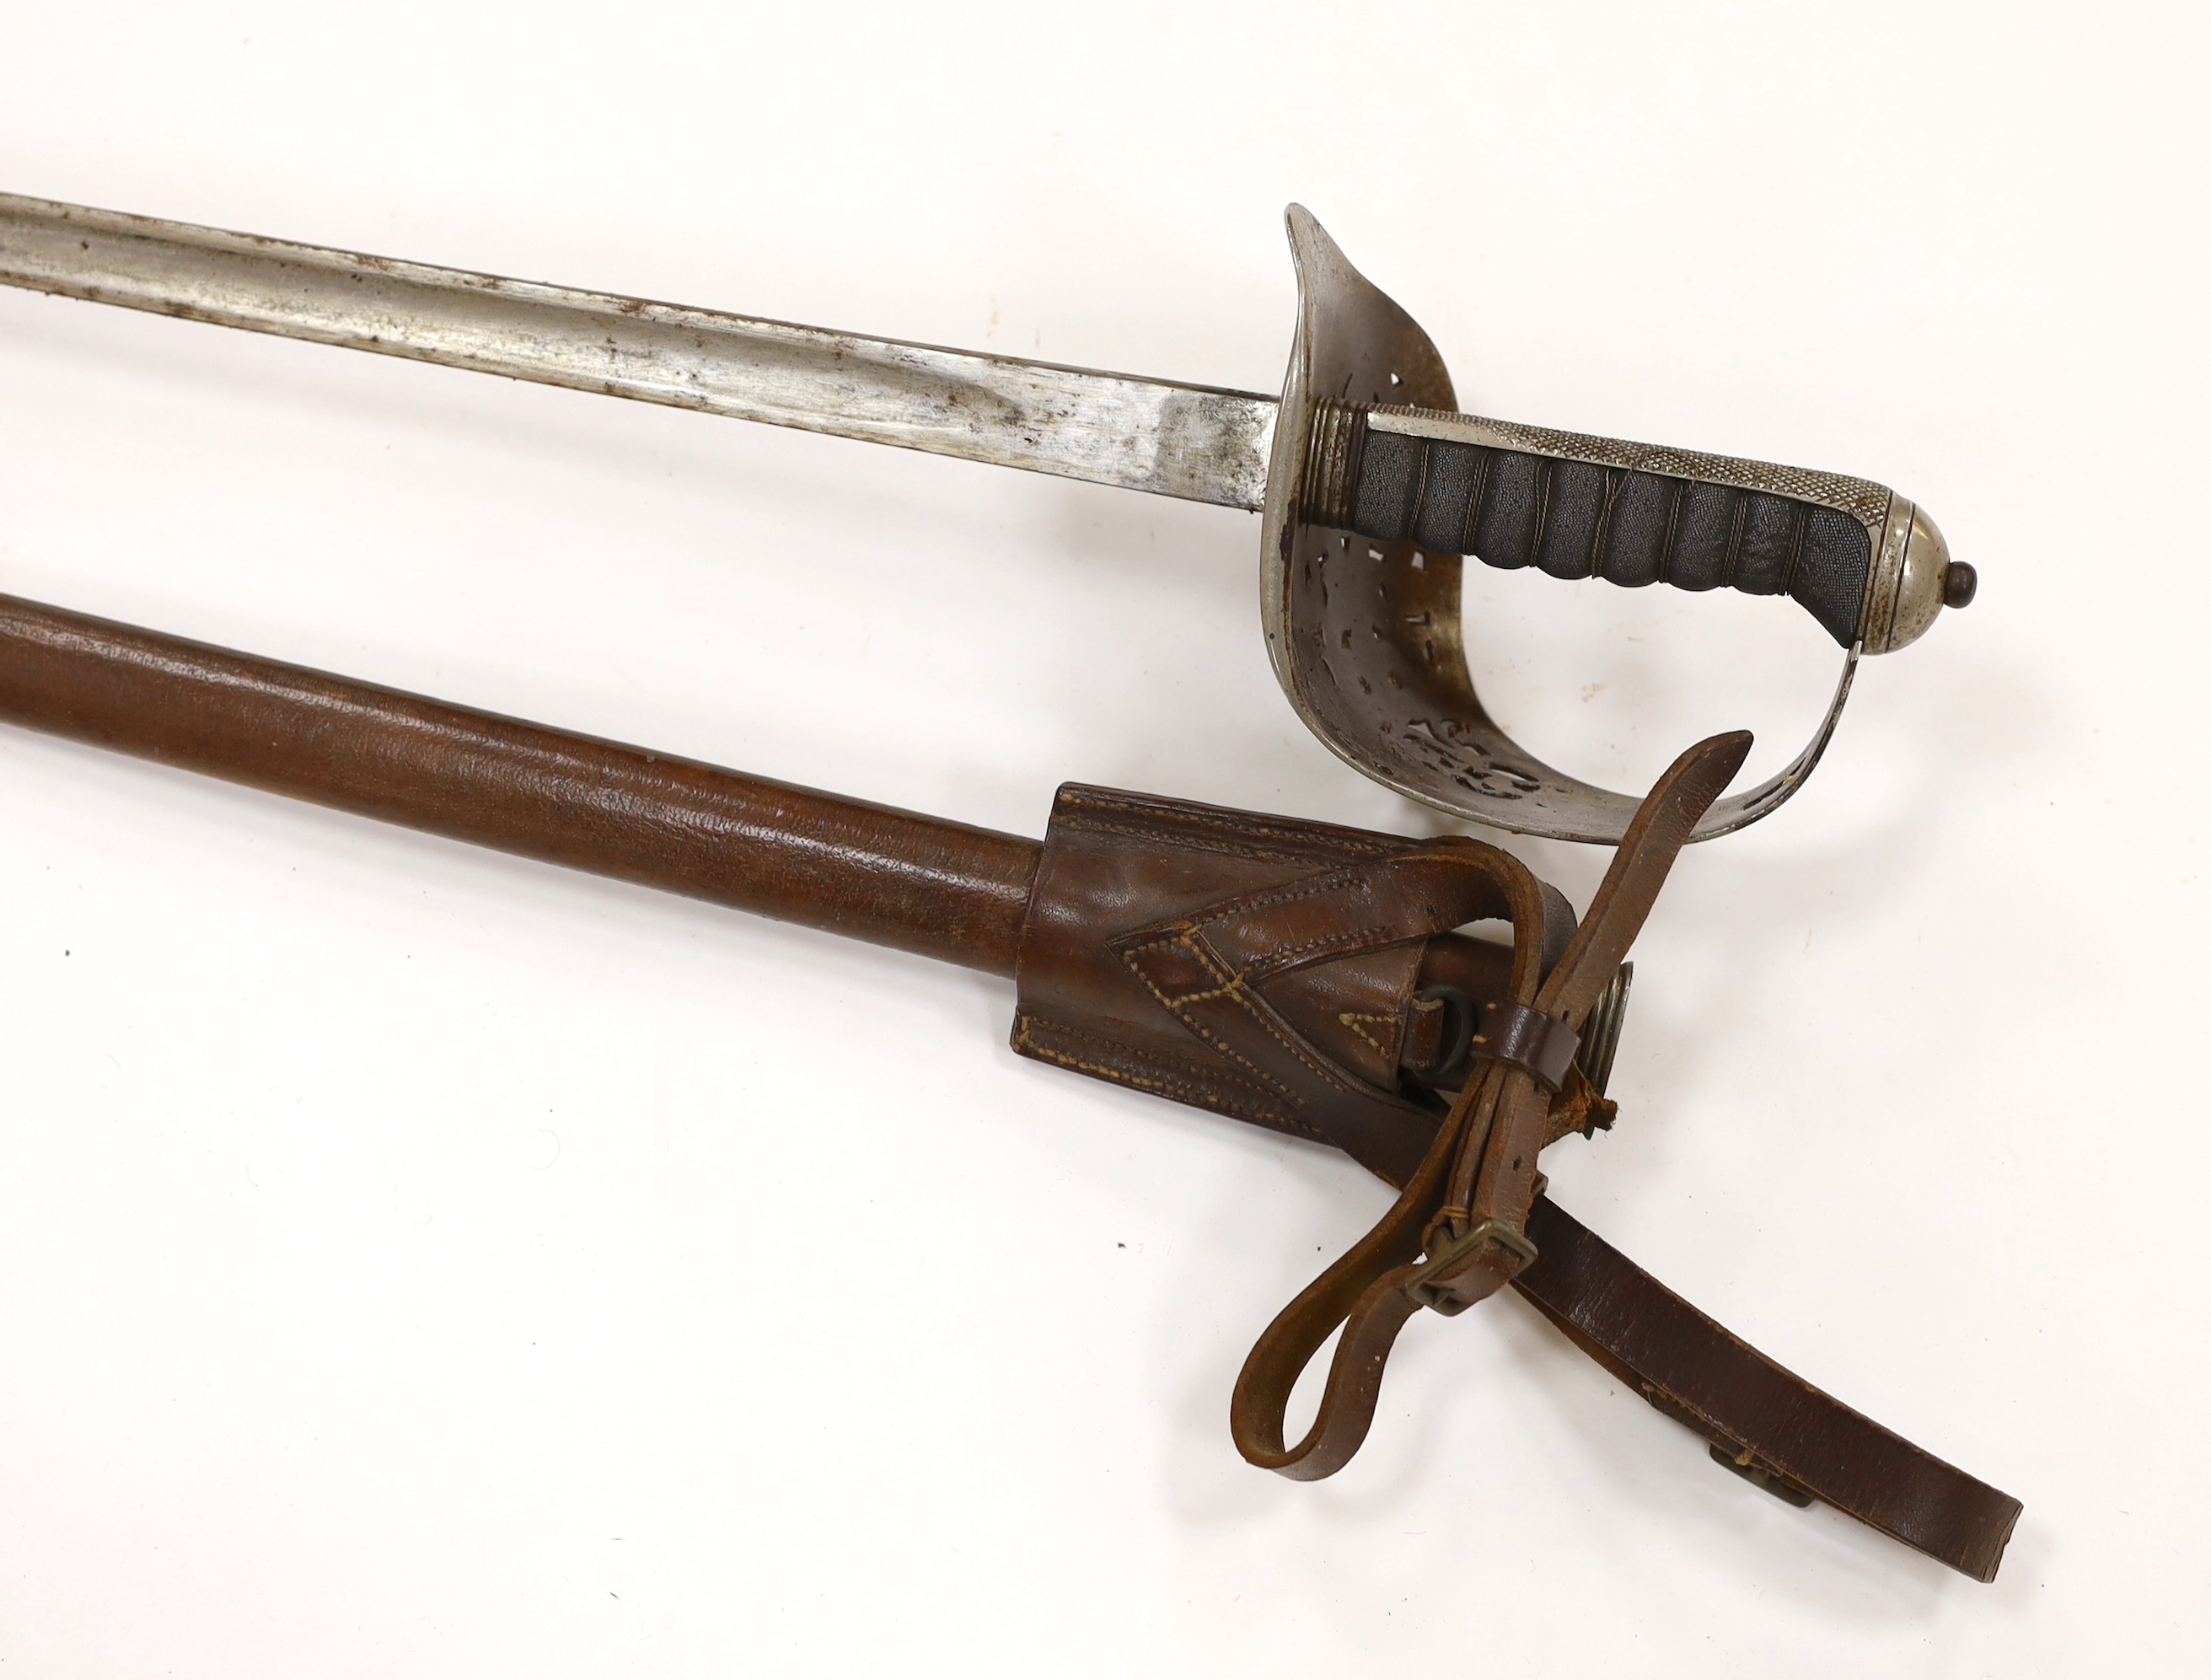 A George V 1897 pattern infantry officer's sword, with scabbard and leather hanger, blade 82cm